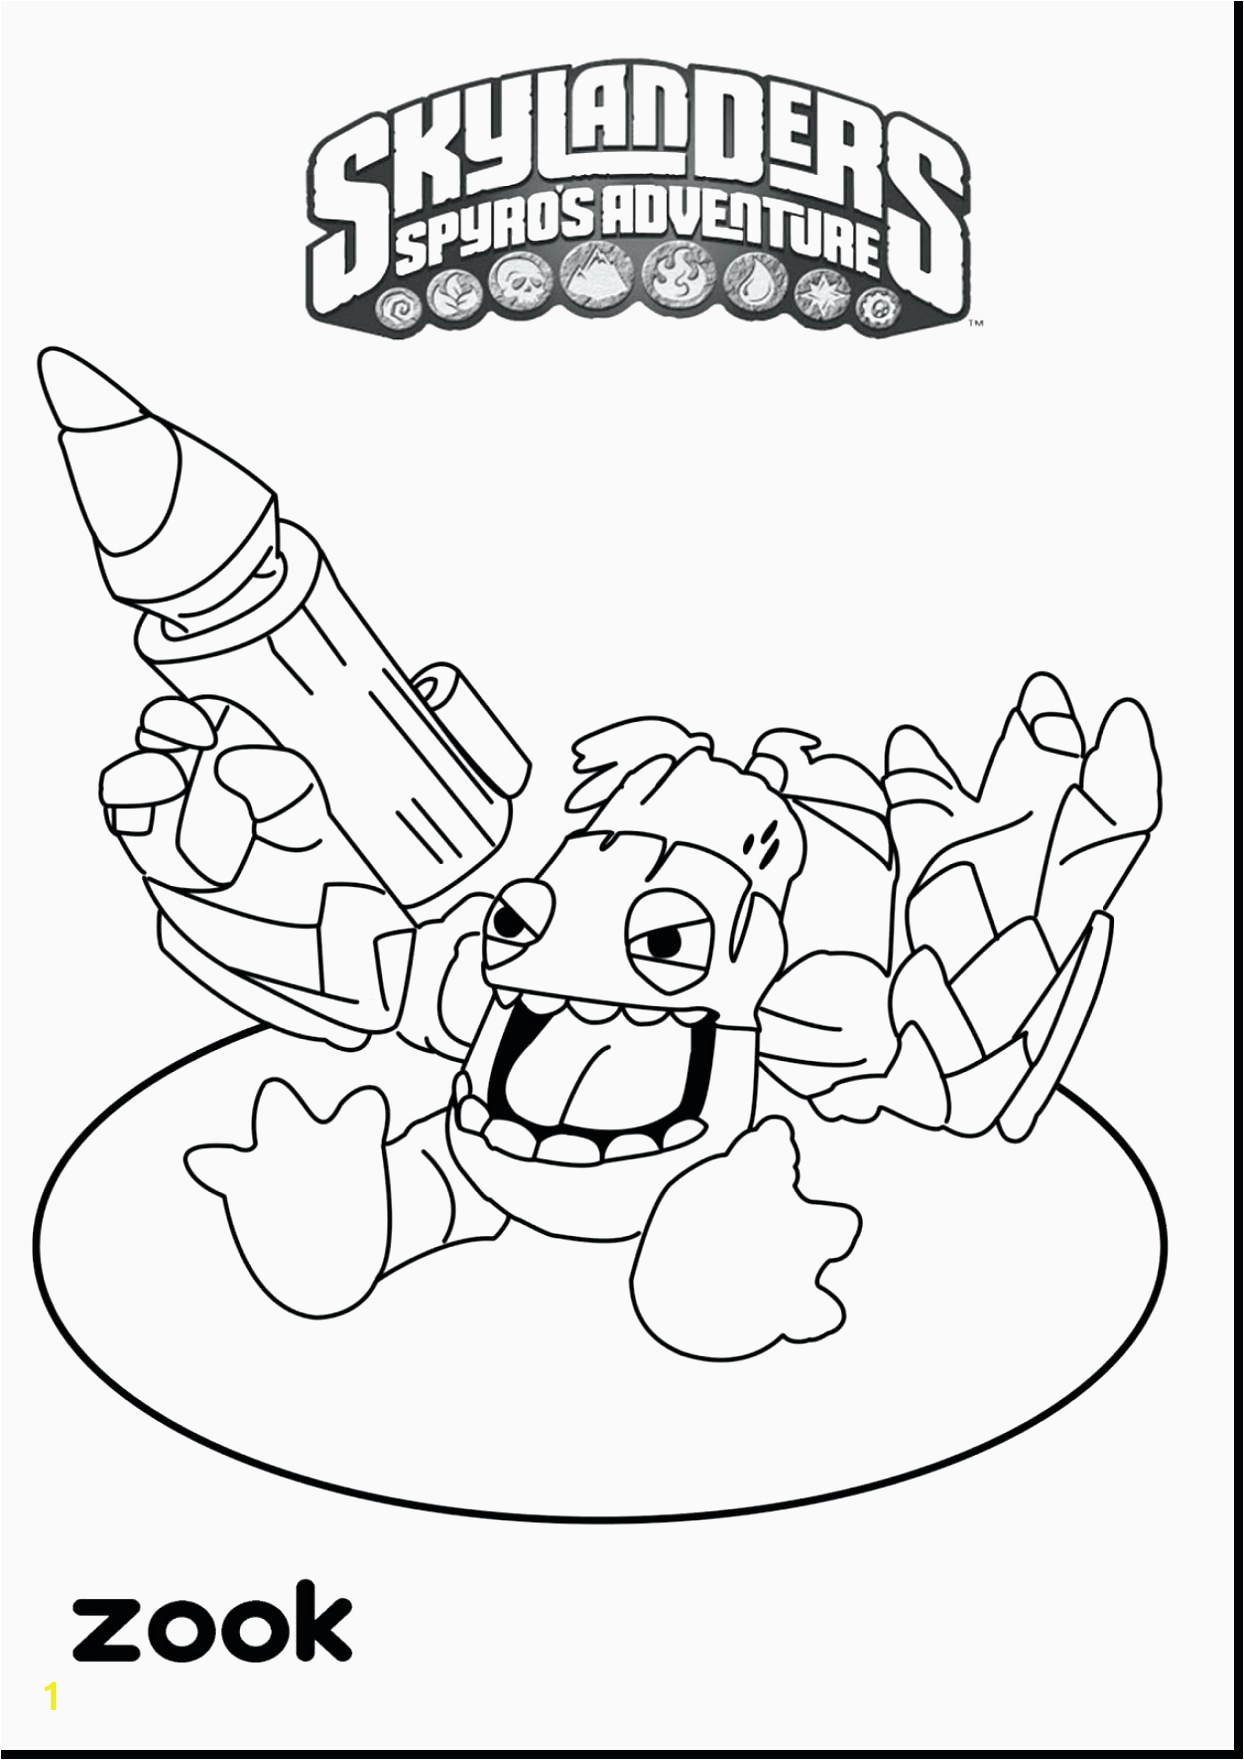 Make A Coloring Page From A Photo How to Make Coloring Pages Cool Coloring Pages